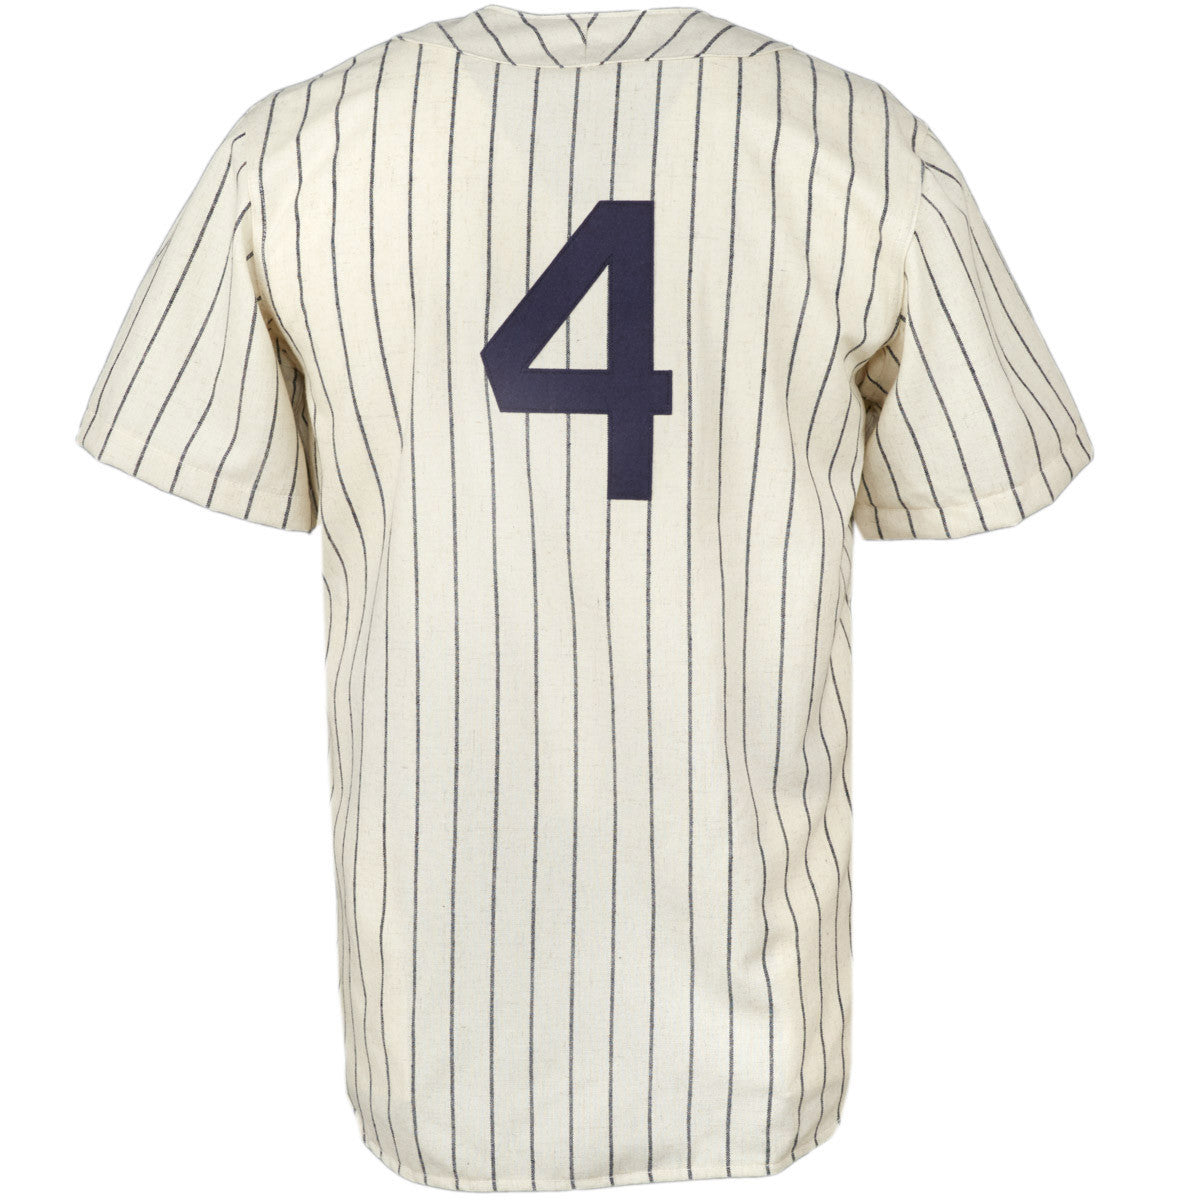 Fort Worth Cats 1940 Home Jersey